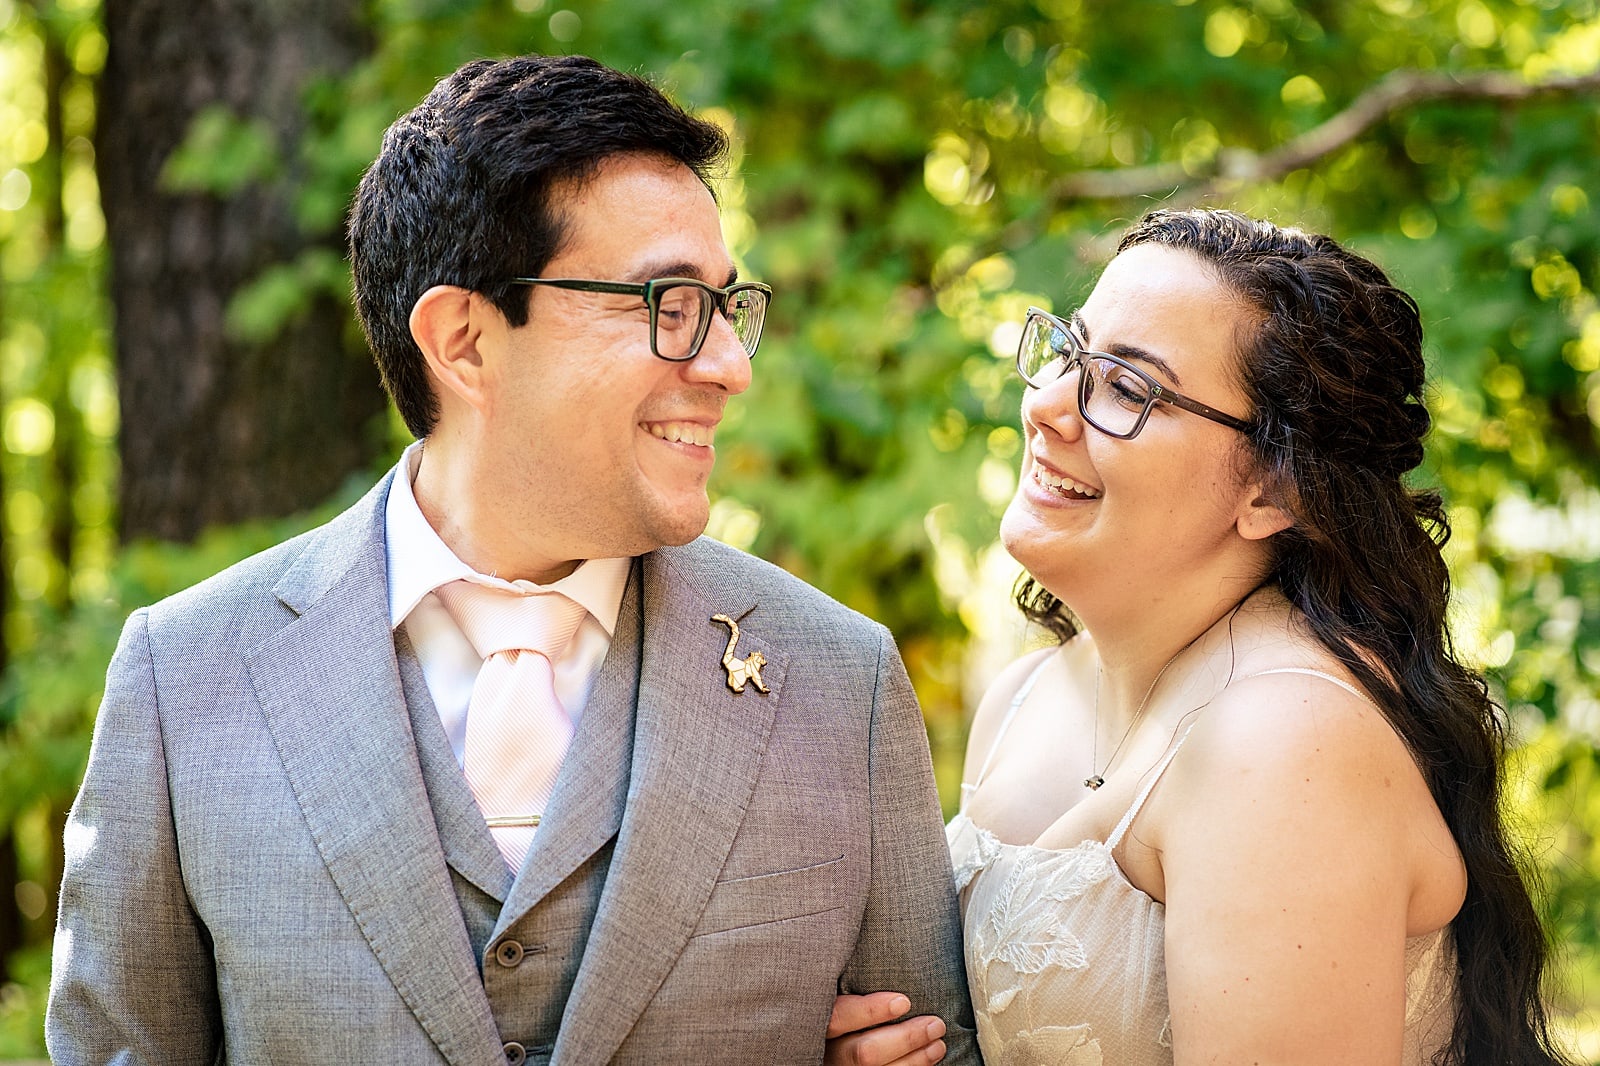 have fun and be silly with your wedding portraits